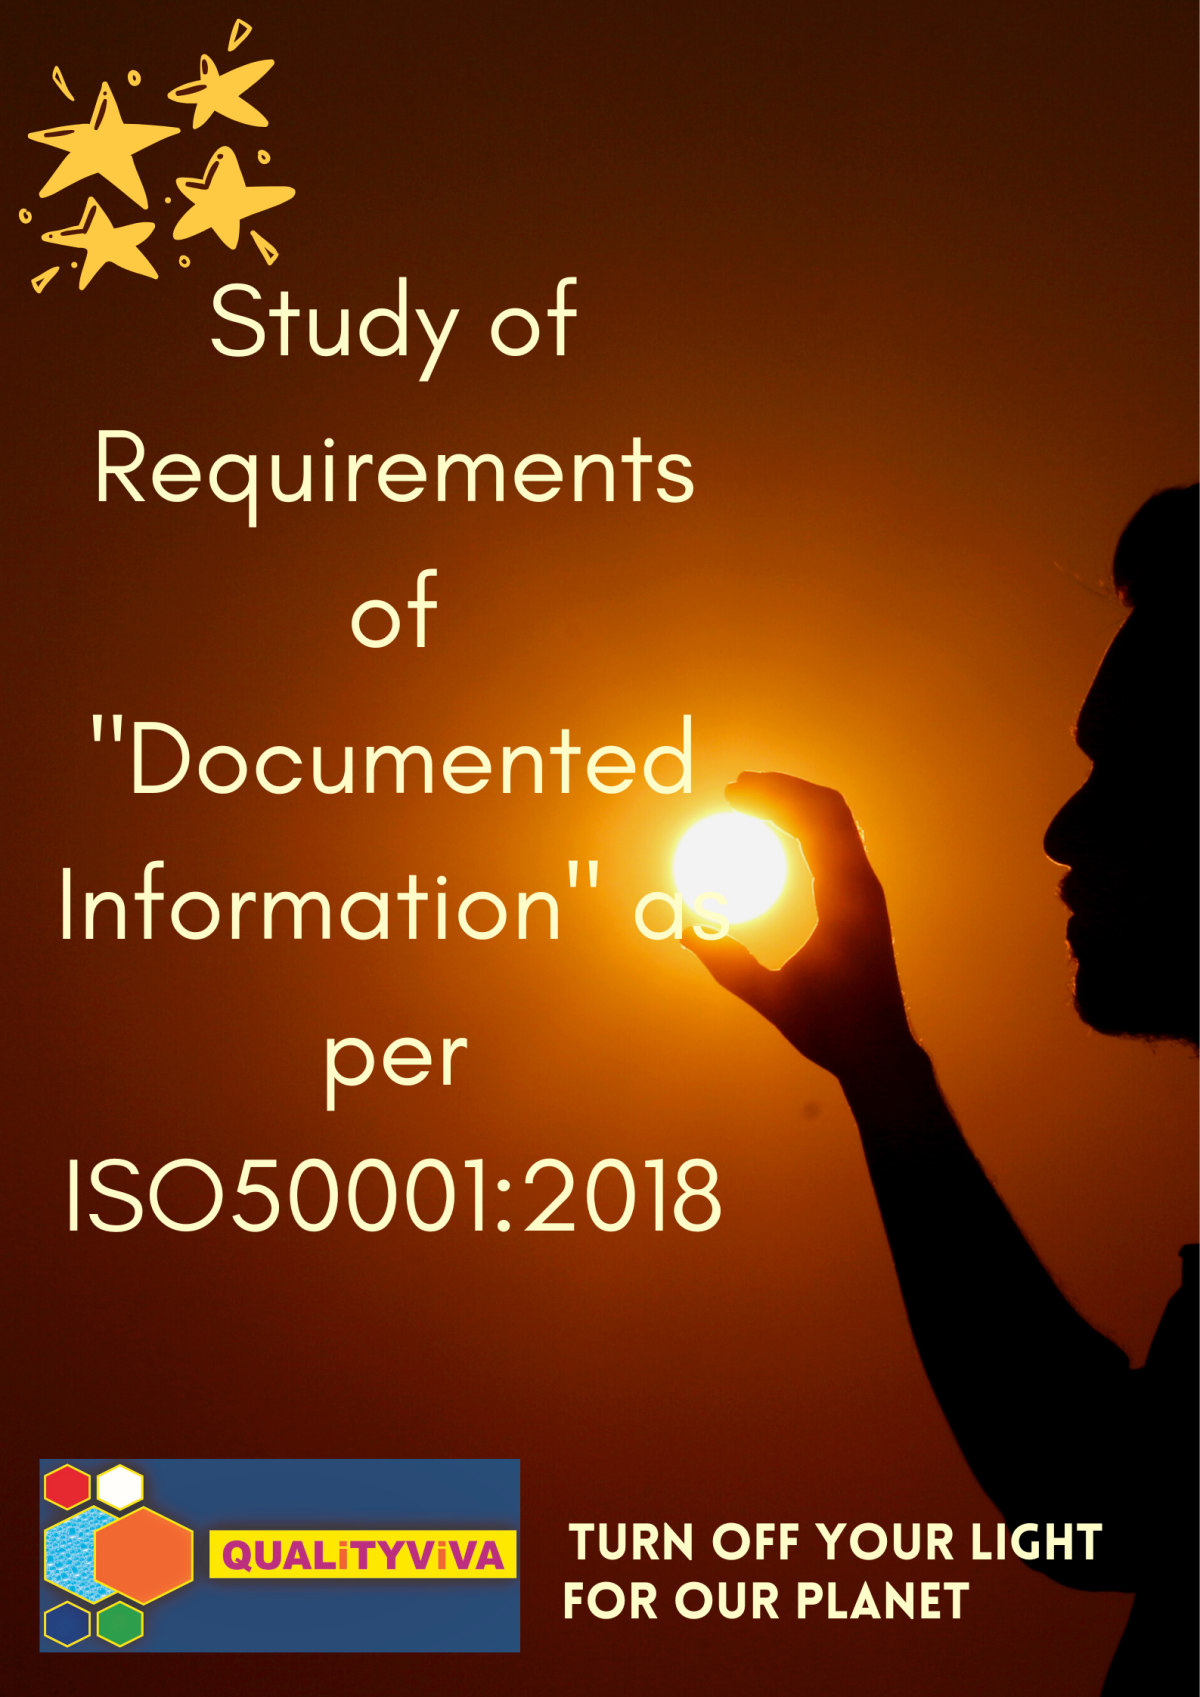 Study of Requirement of “Documented Information” as per ISO 50001:2018